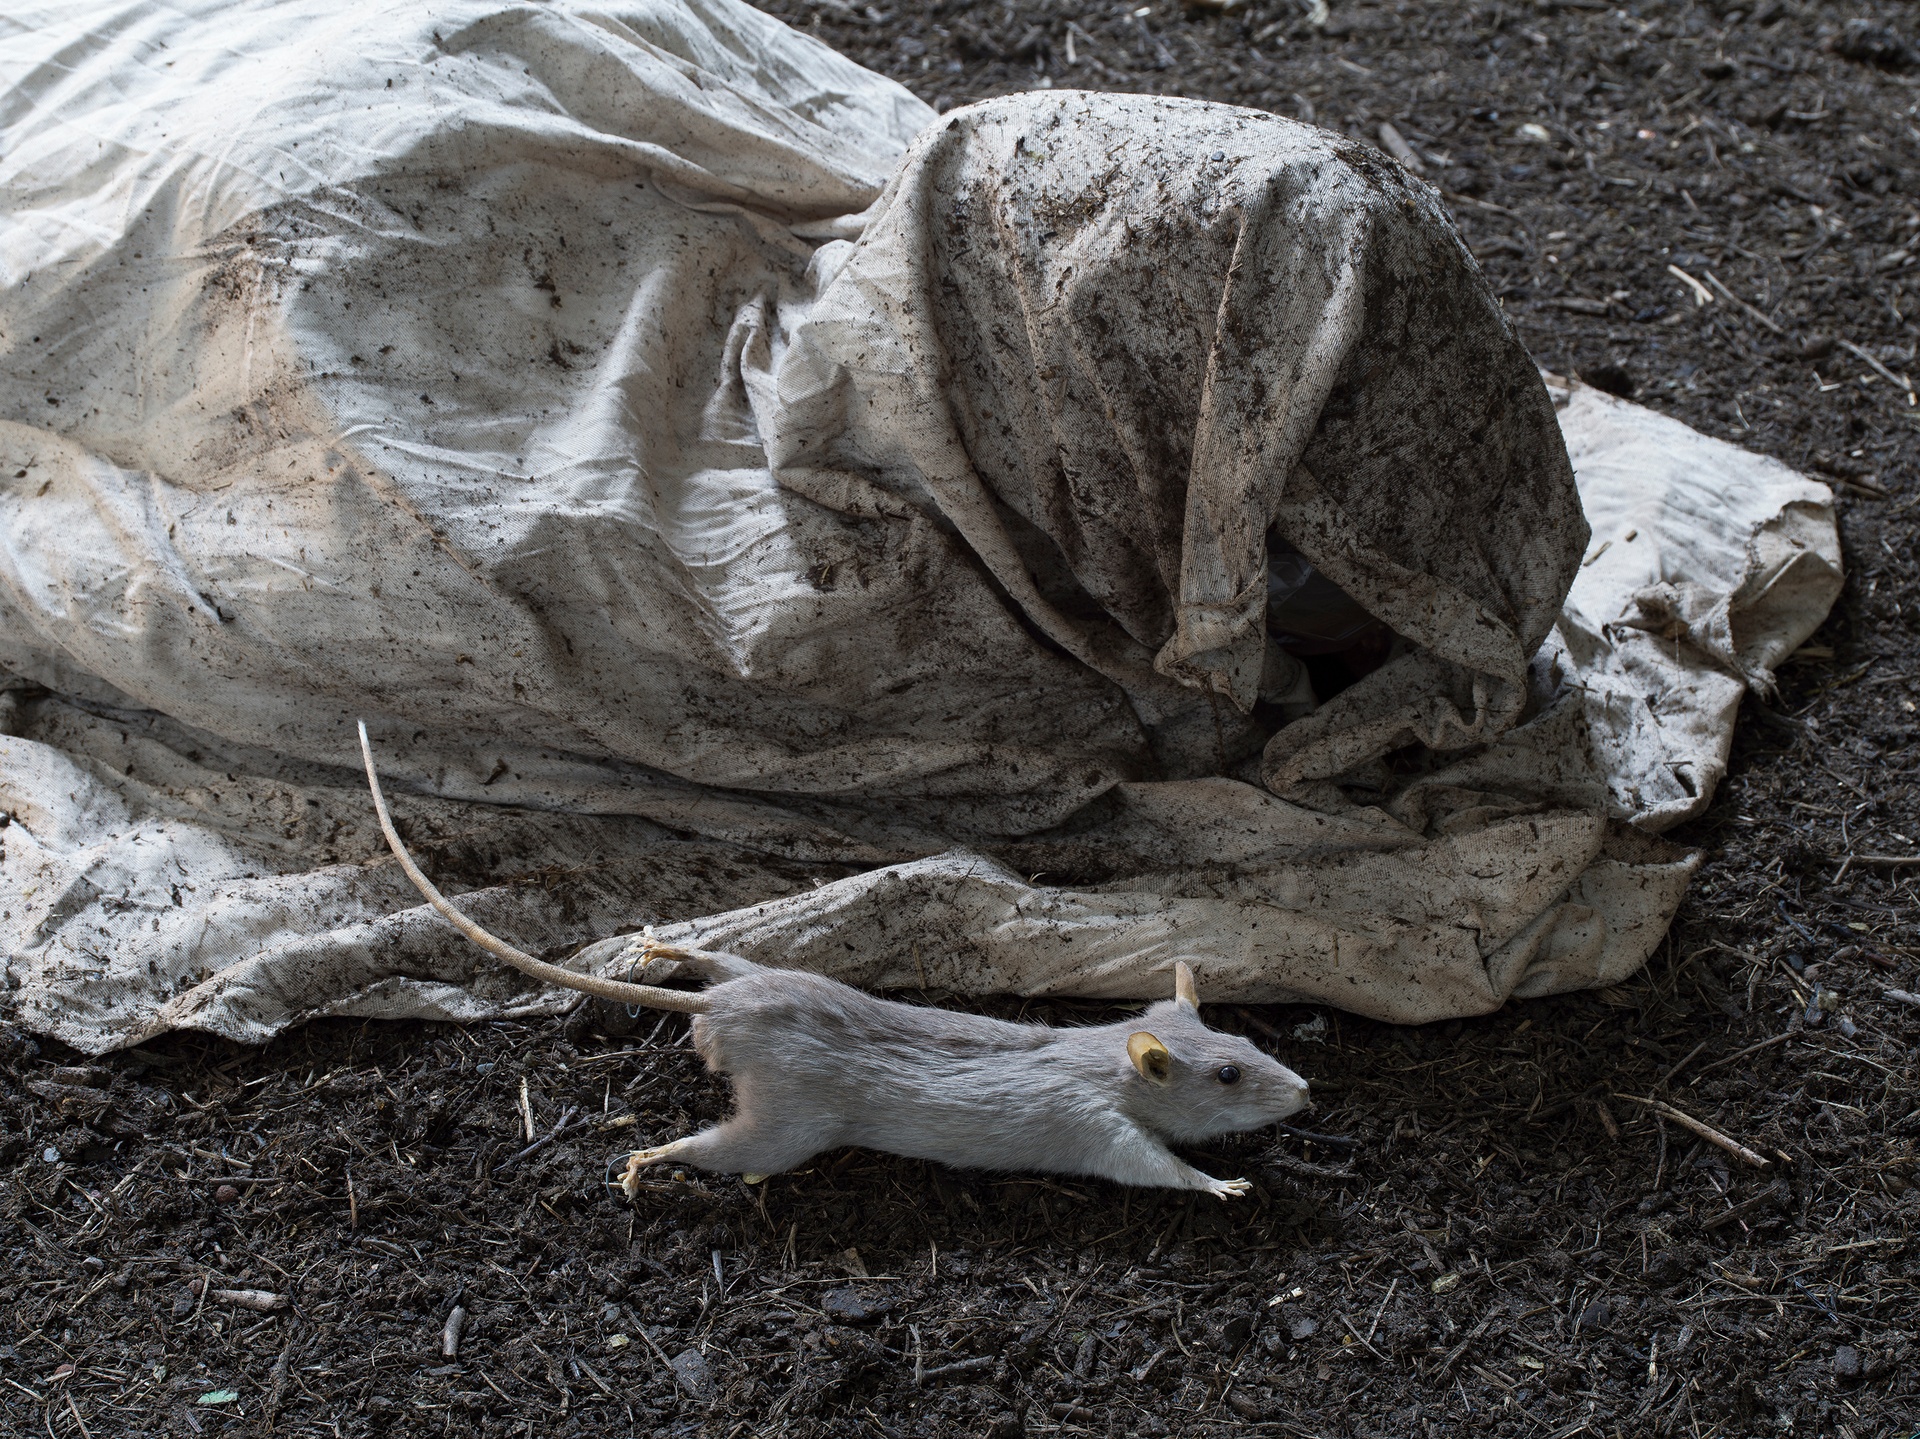 Puppies Puppies (Jade Guanaro Kuriki-Olivo)Plague (Detail), 2019Soil, mannequins, white cloth, latex mask, fabric cowl, taxidermy rats, photo wallpaper, video projection (color, no sound)